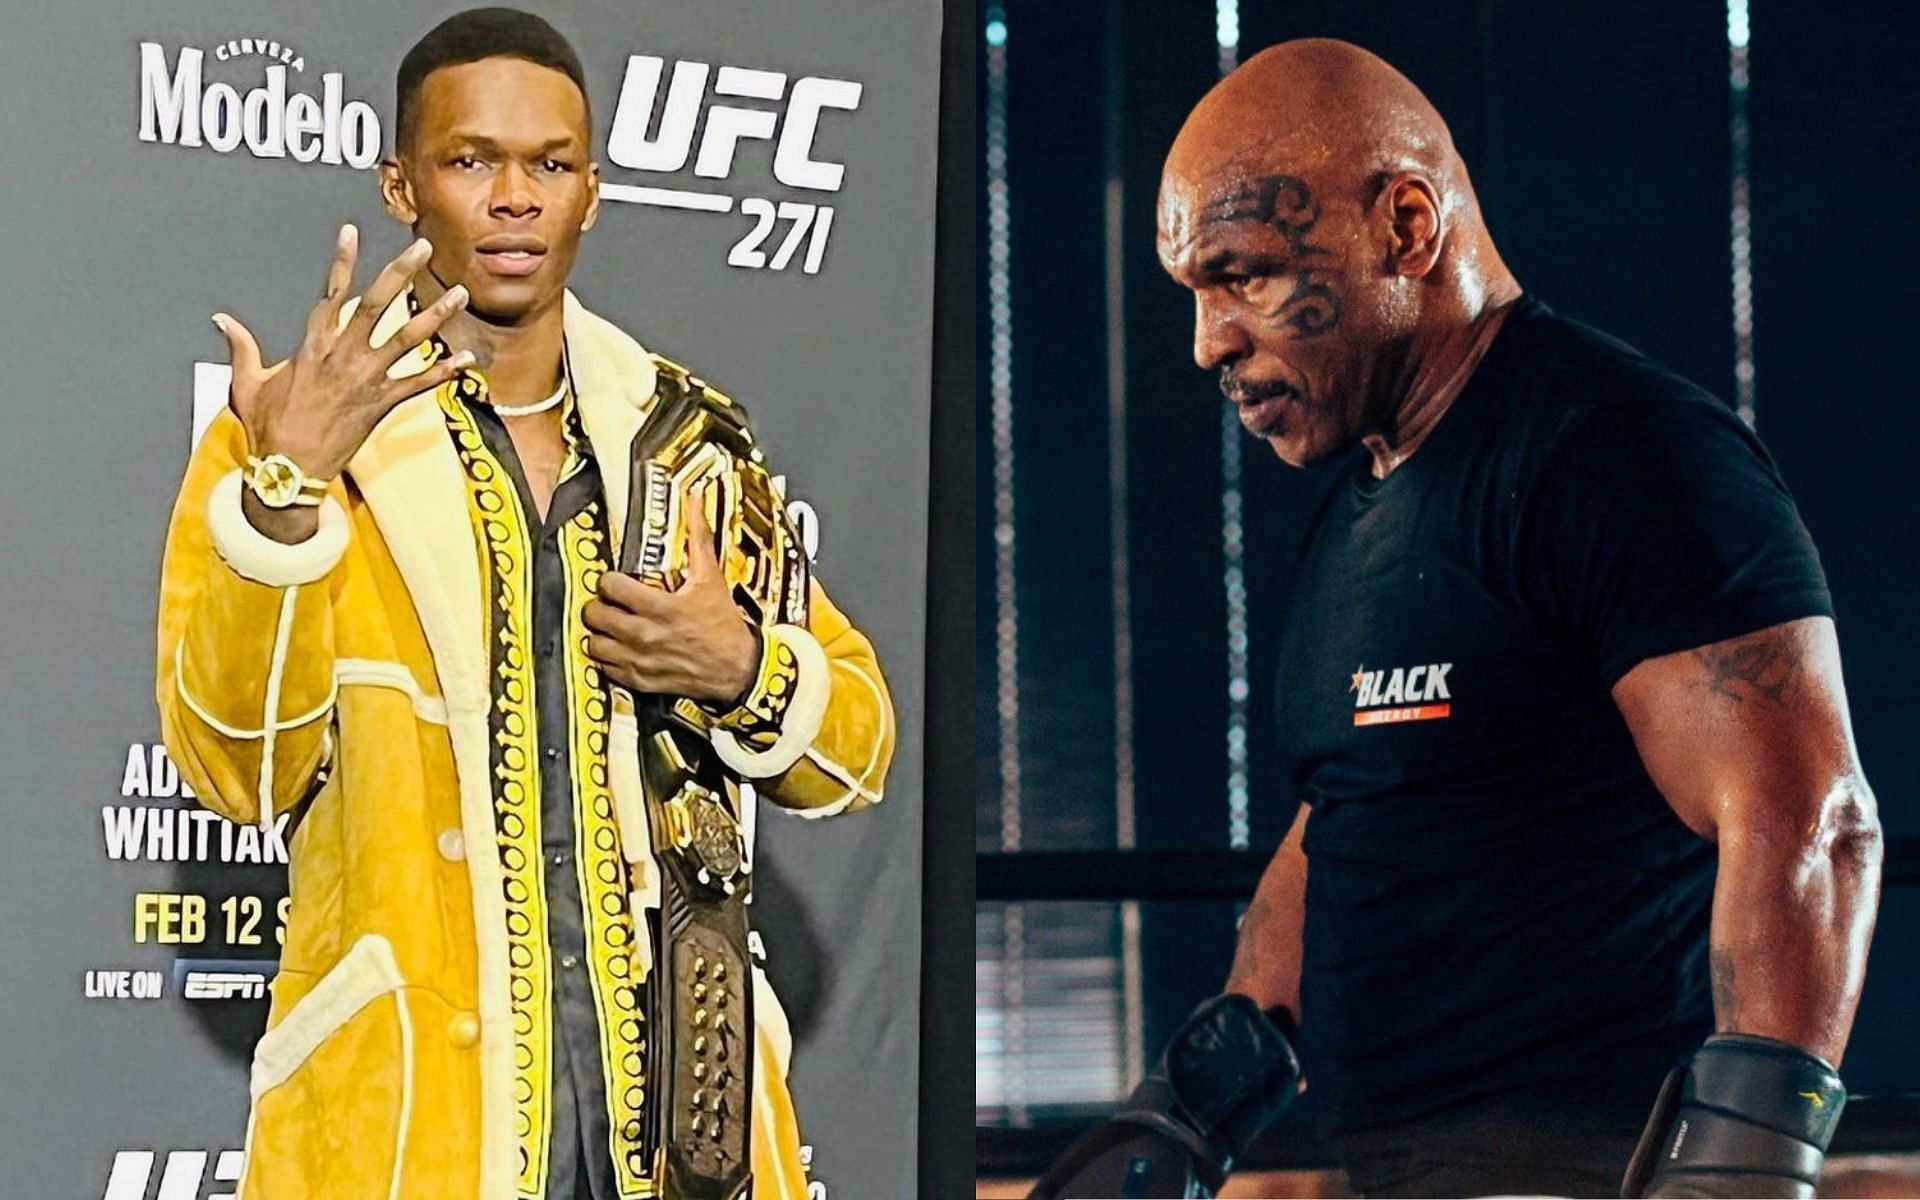 Israel Adesanya (left) and Mike Tyson (right) [Image credits: @stylebender and @miketyson via Instagram]